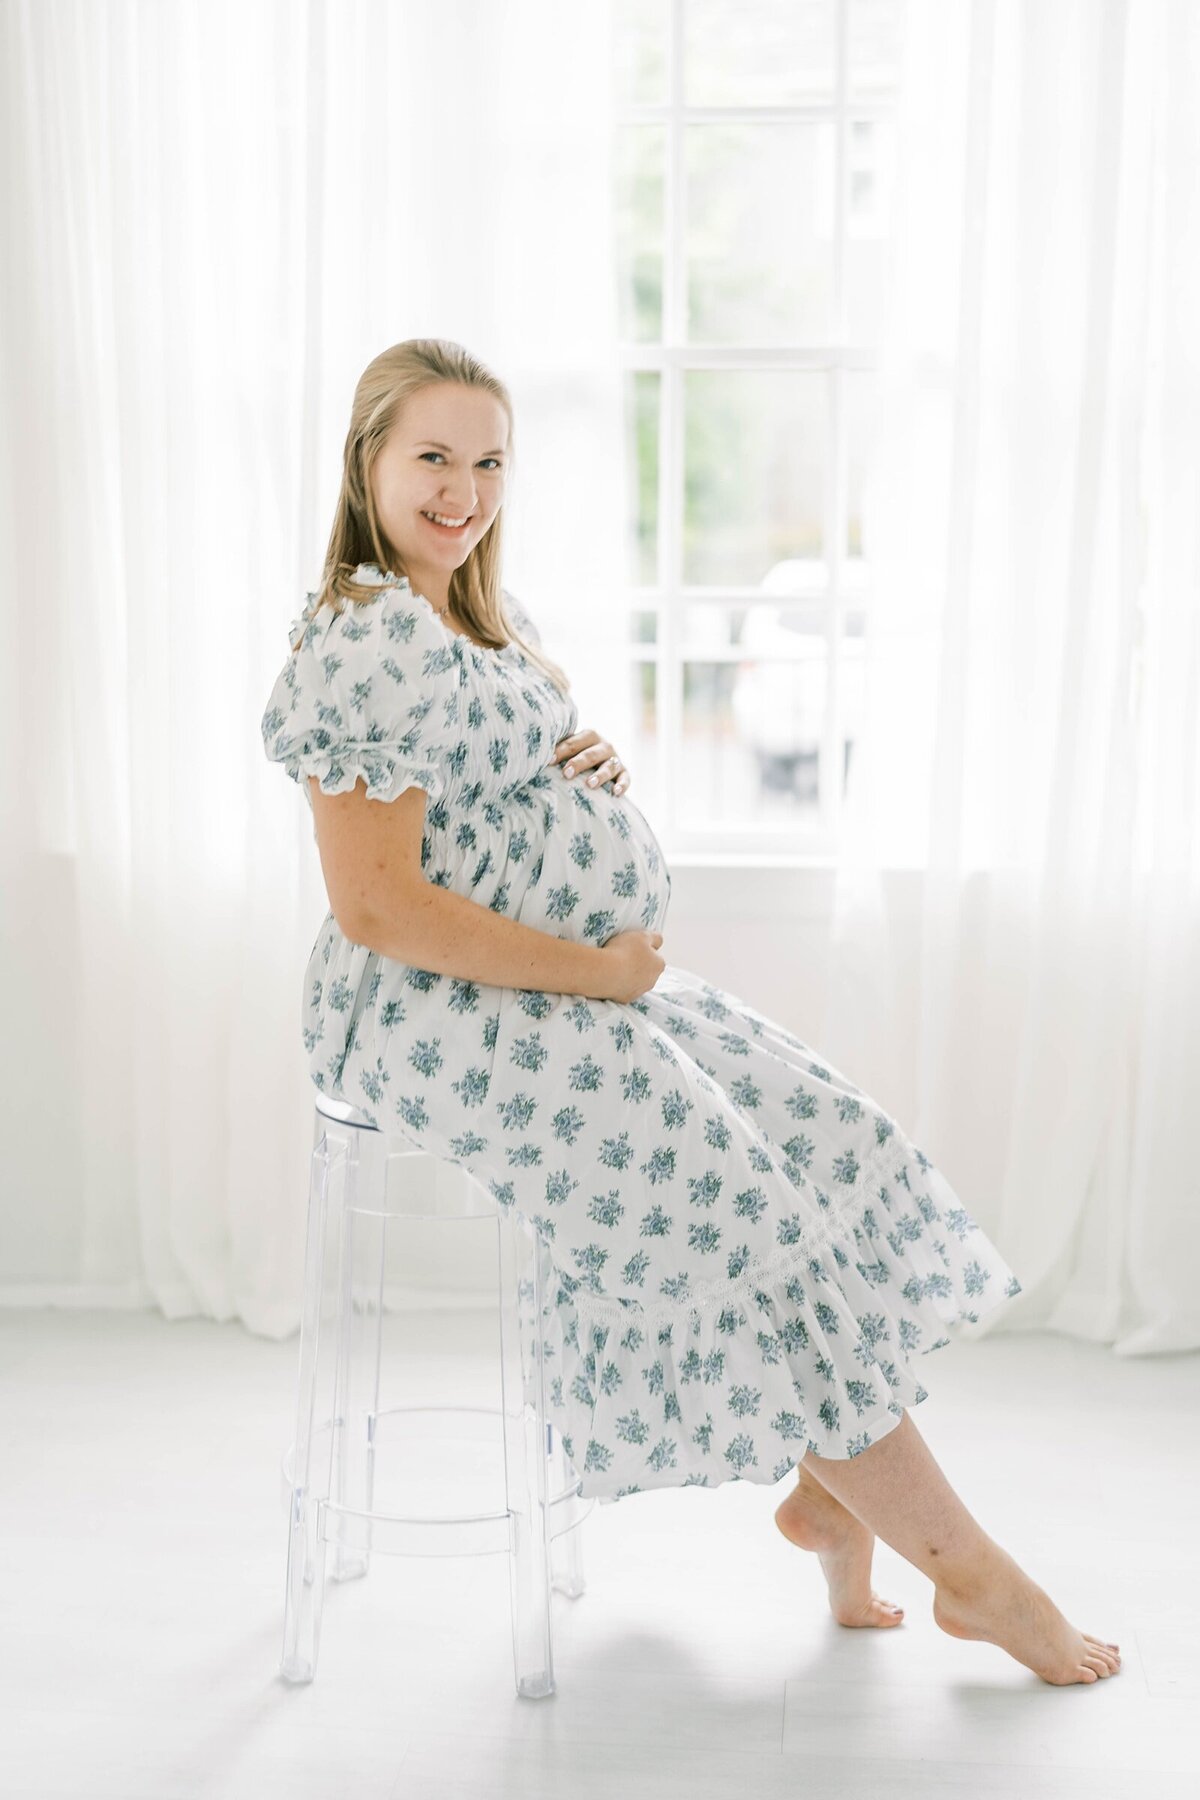 Roswell Maternity Photographer_0097